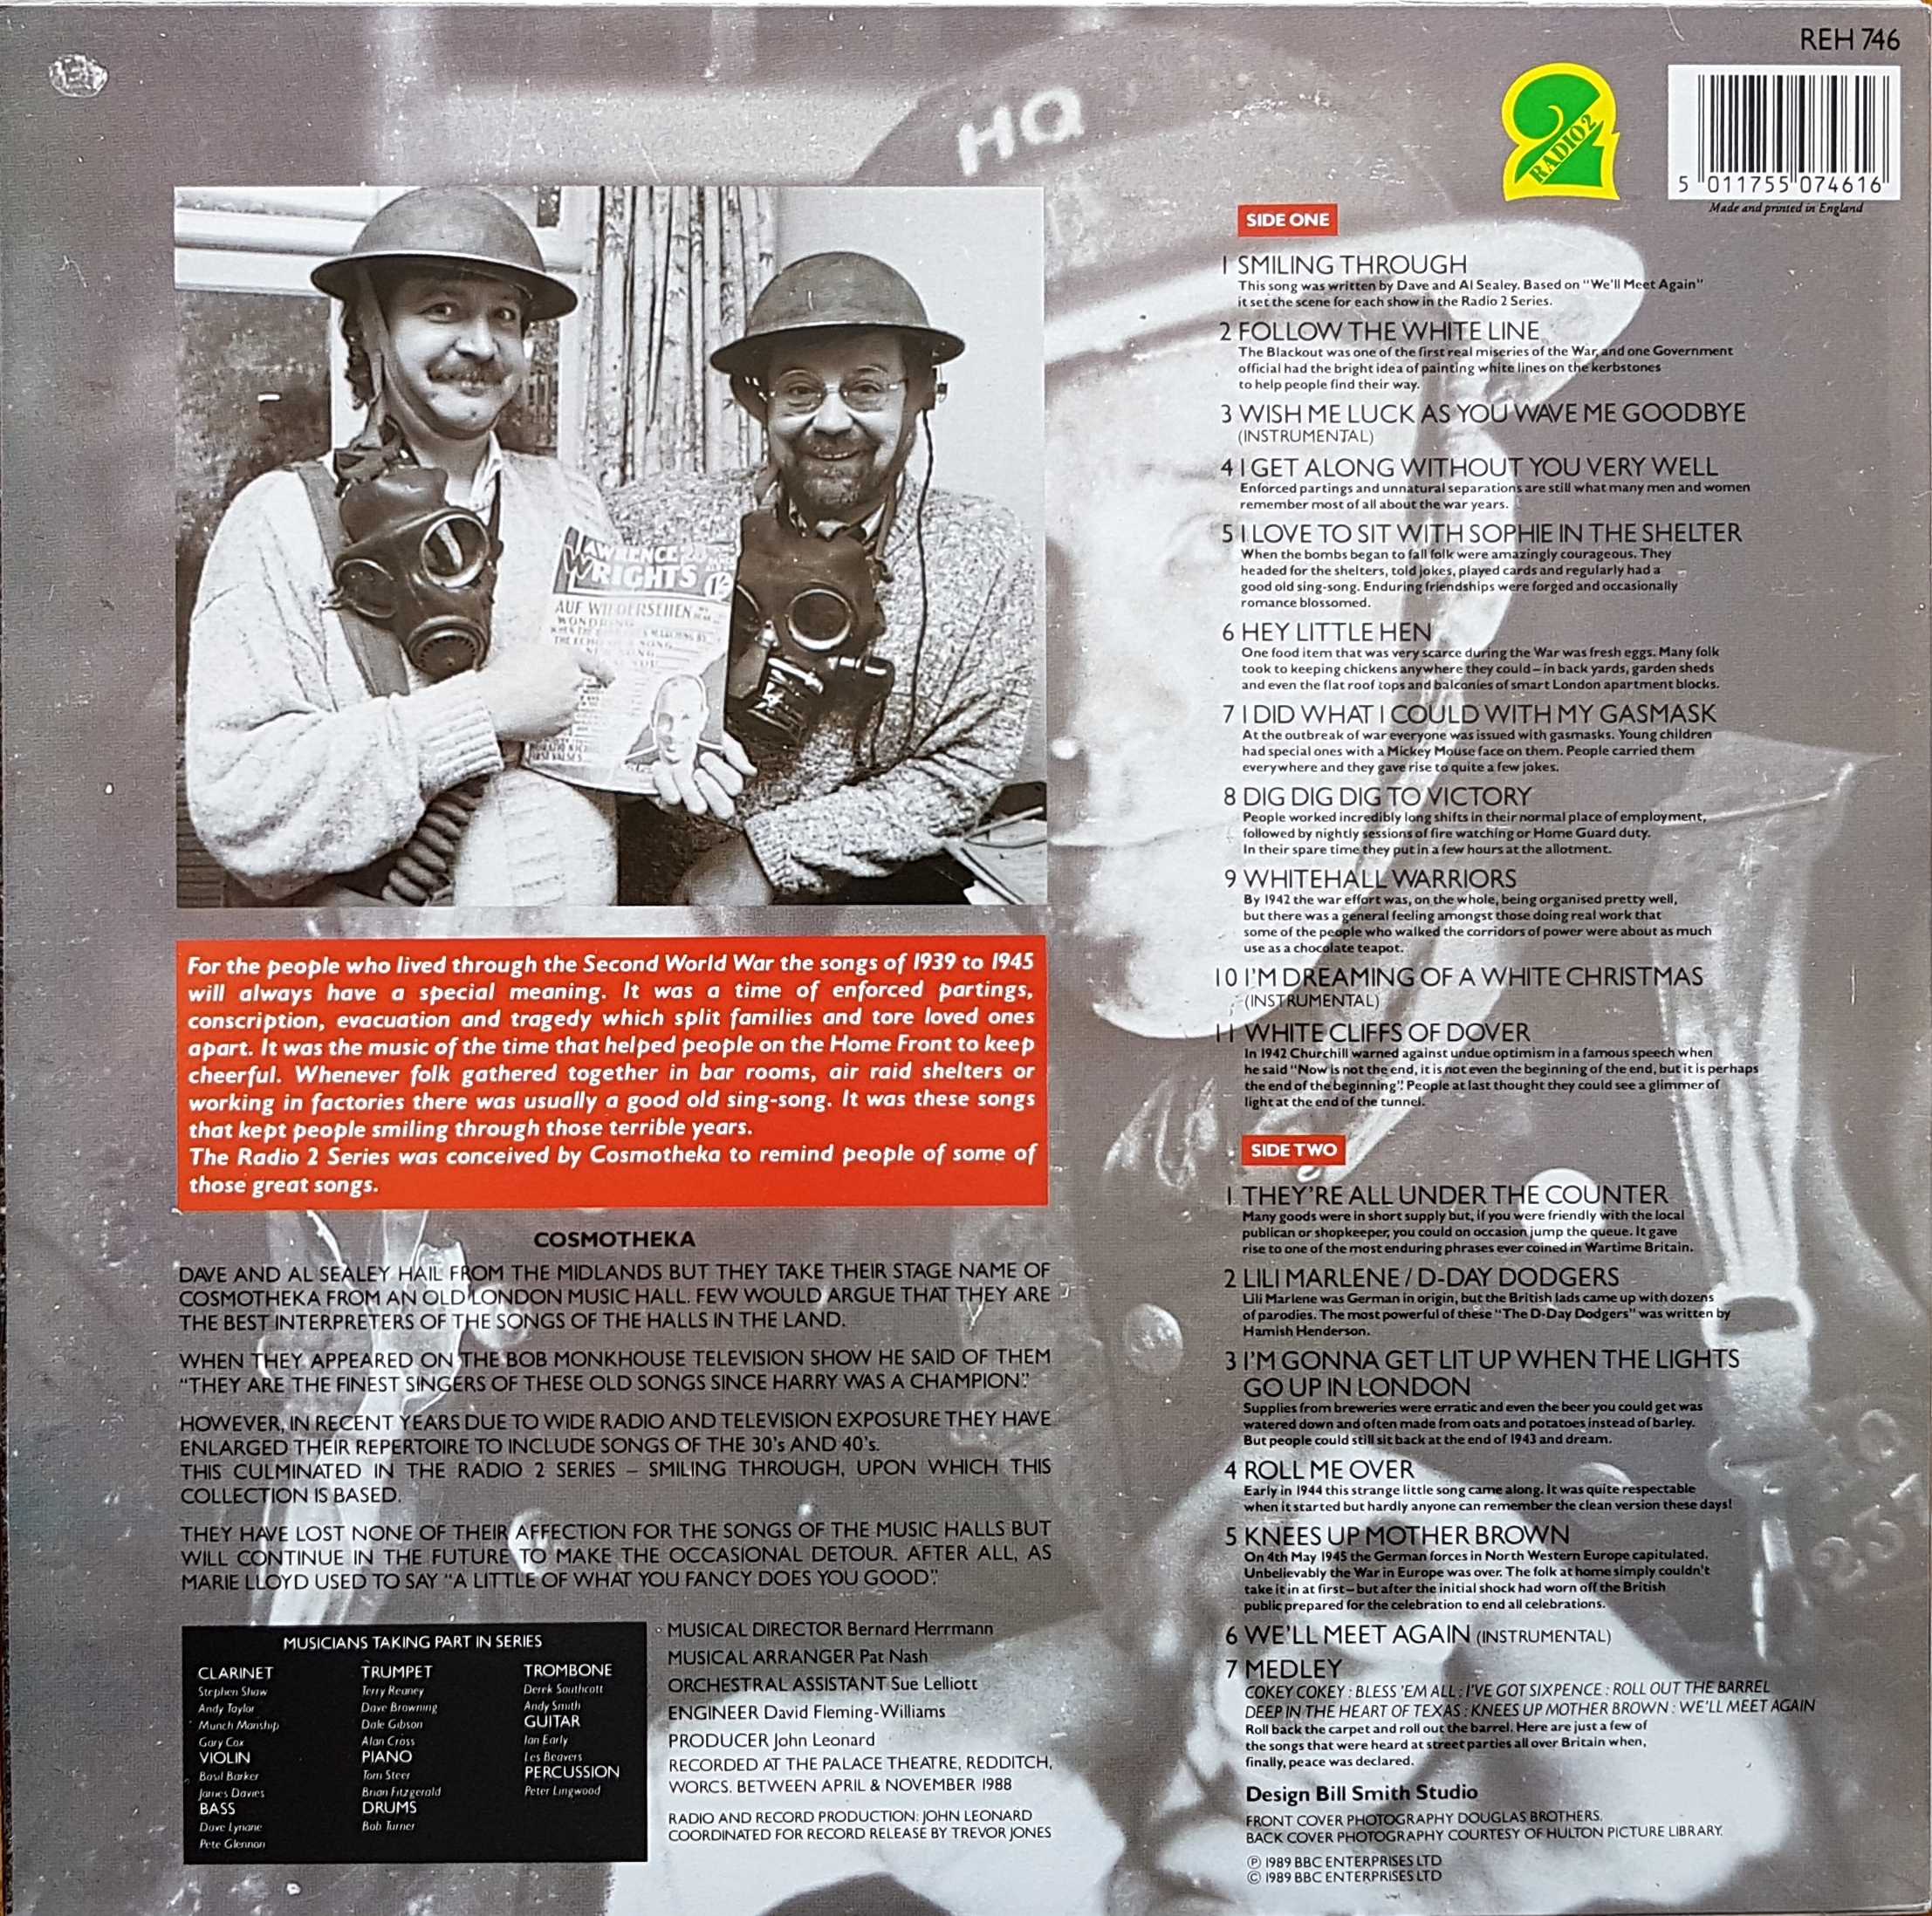 Picture of REH 746 Keep smiling through - Cosmotheka by artist Various from the BBC records and Tapes library